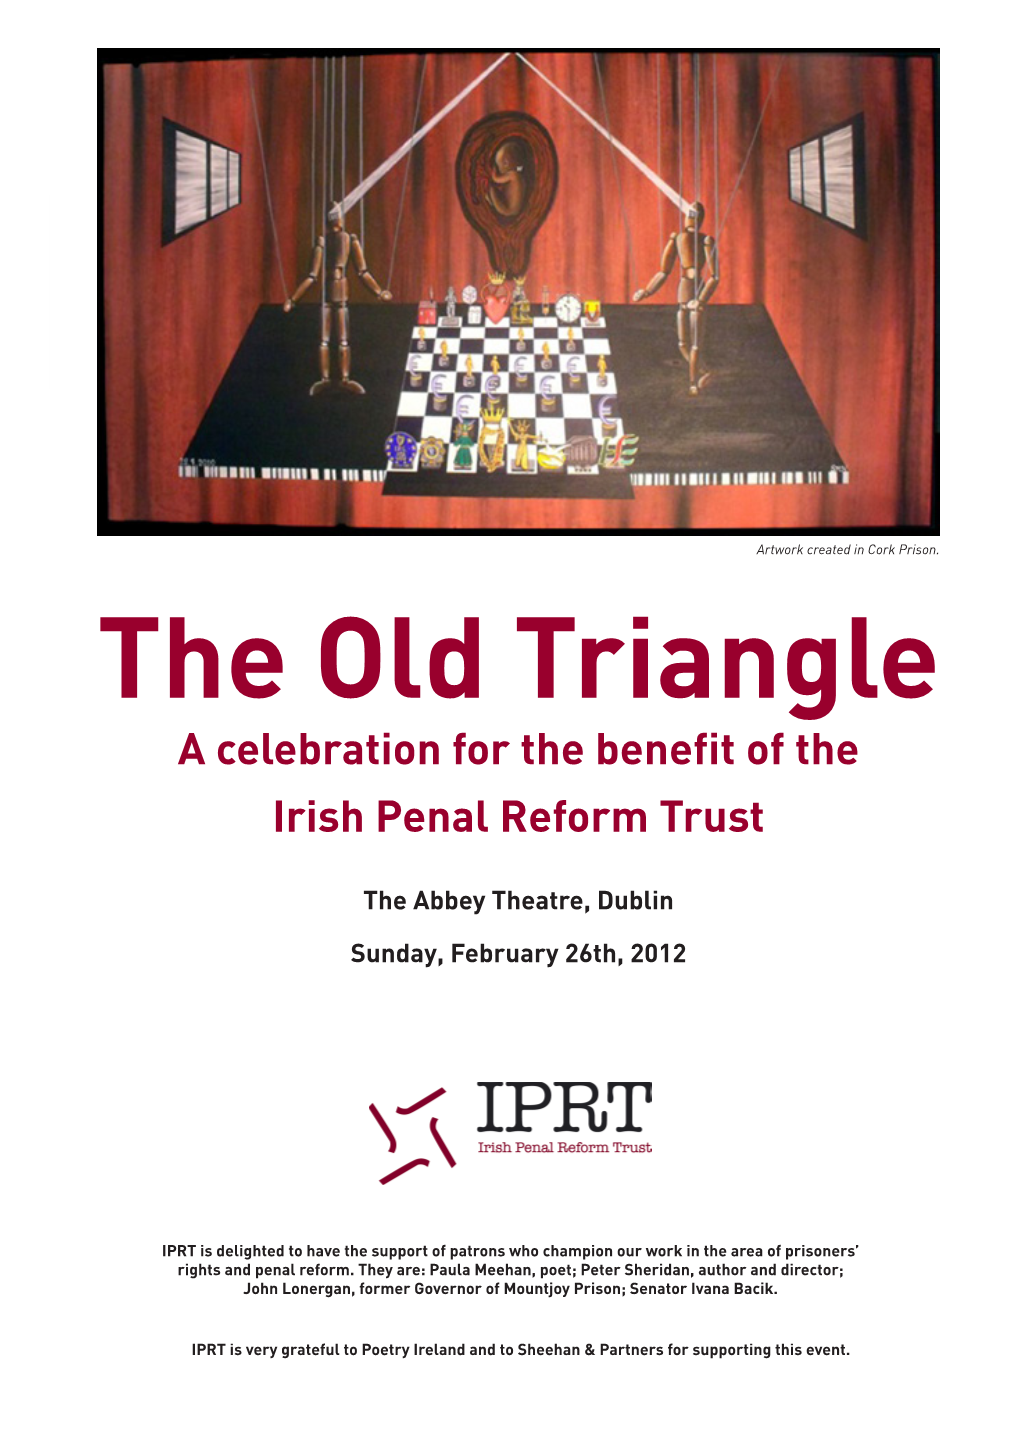 The Old Triangle a Celebration for the Benefit of the Irish Penal Reform Trust